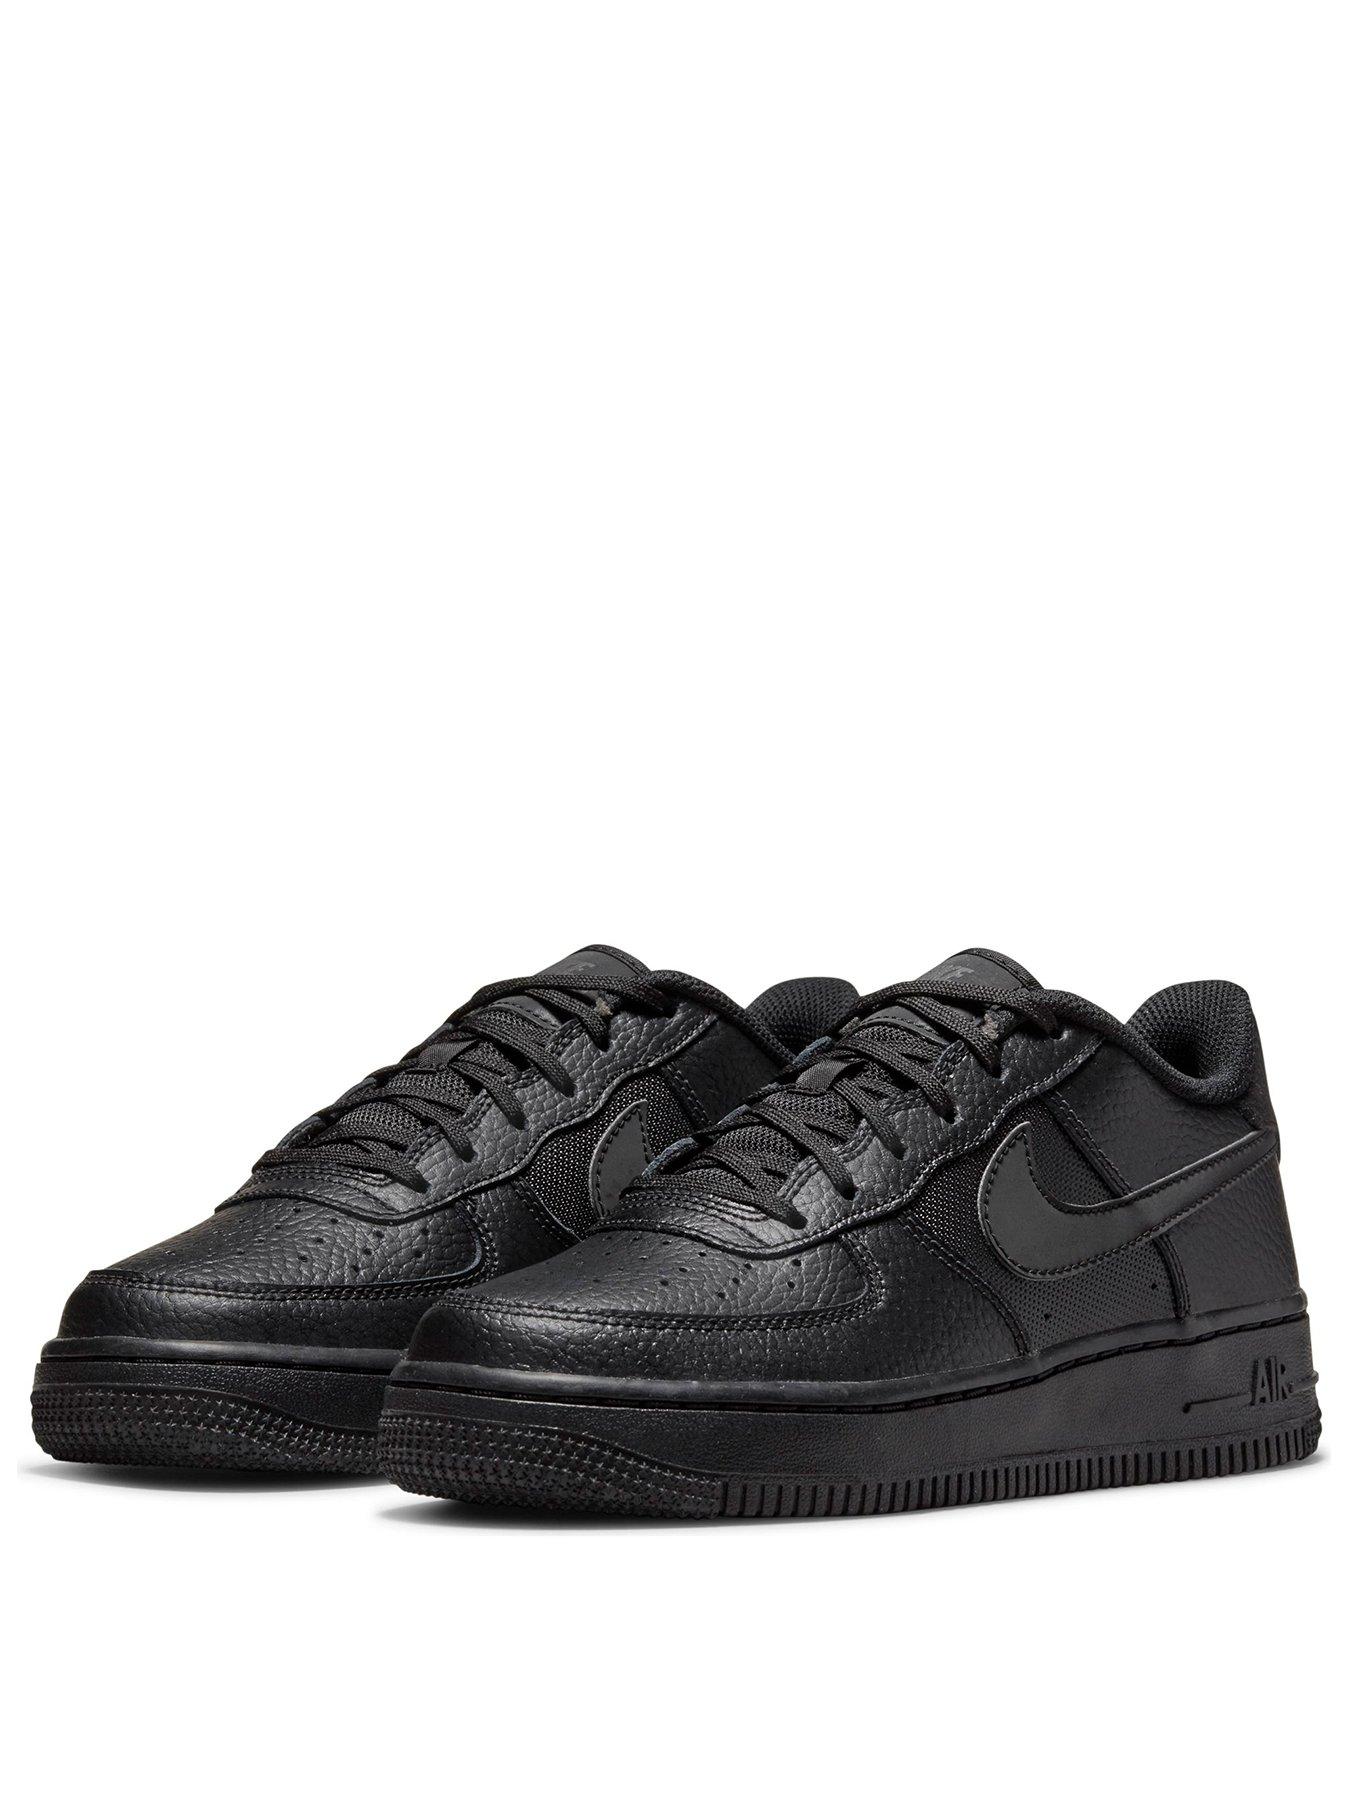 black air force 1 on girl